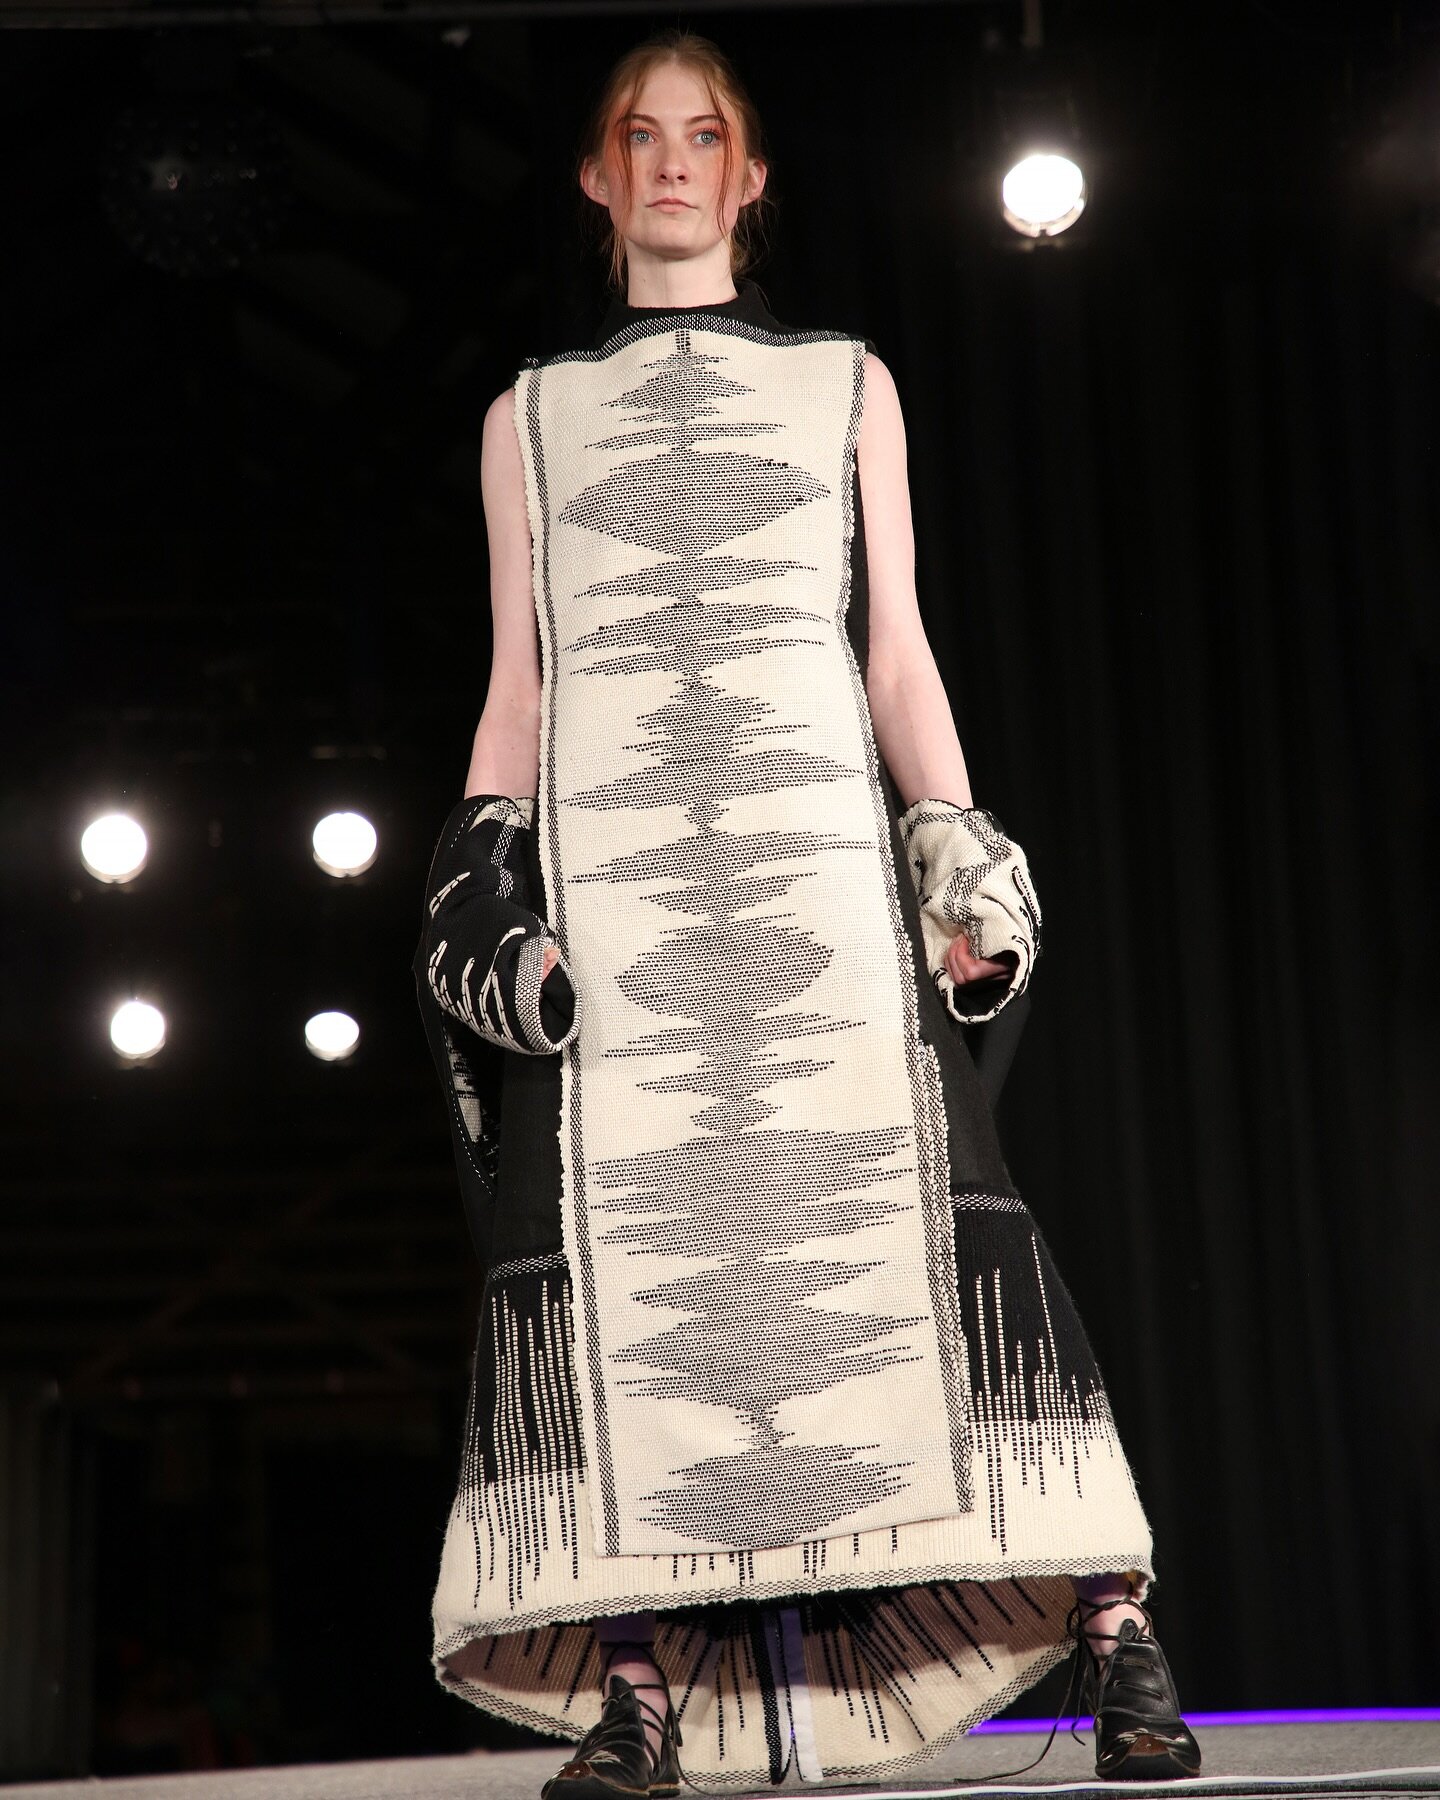 Wearable Art and Innovation in Wool winner Sasha Mateucci created this stunning soundwave design. Epic Architecture was proud to sponsor the &lsquo;Wearable Art&rsquo; category at this year&rsquo;s Fleece to Fashion Awards.

#fleecetofashion #inspire